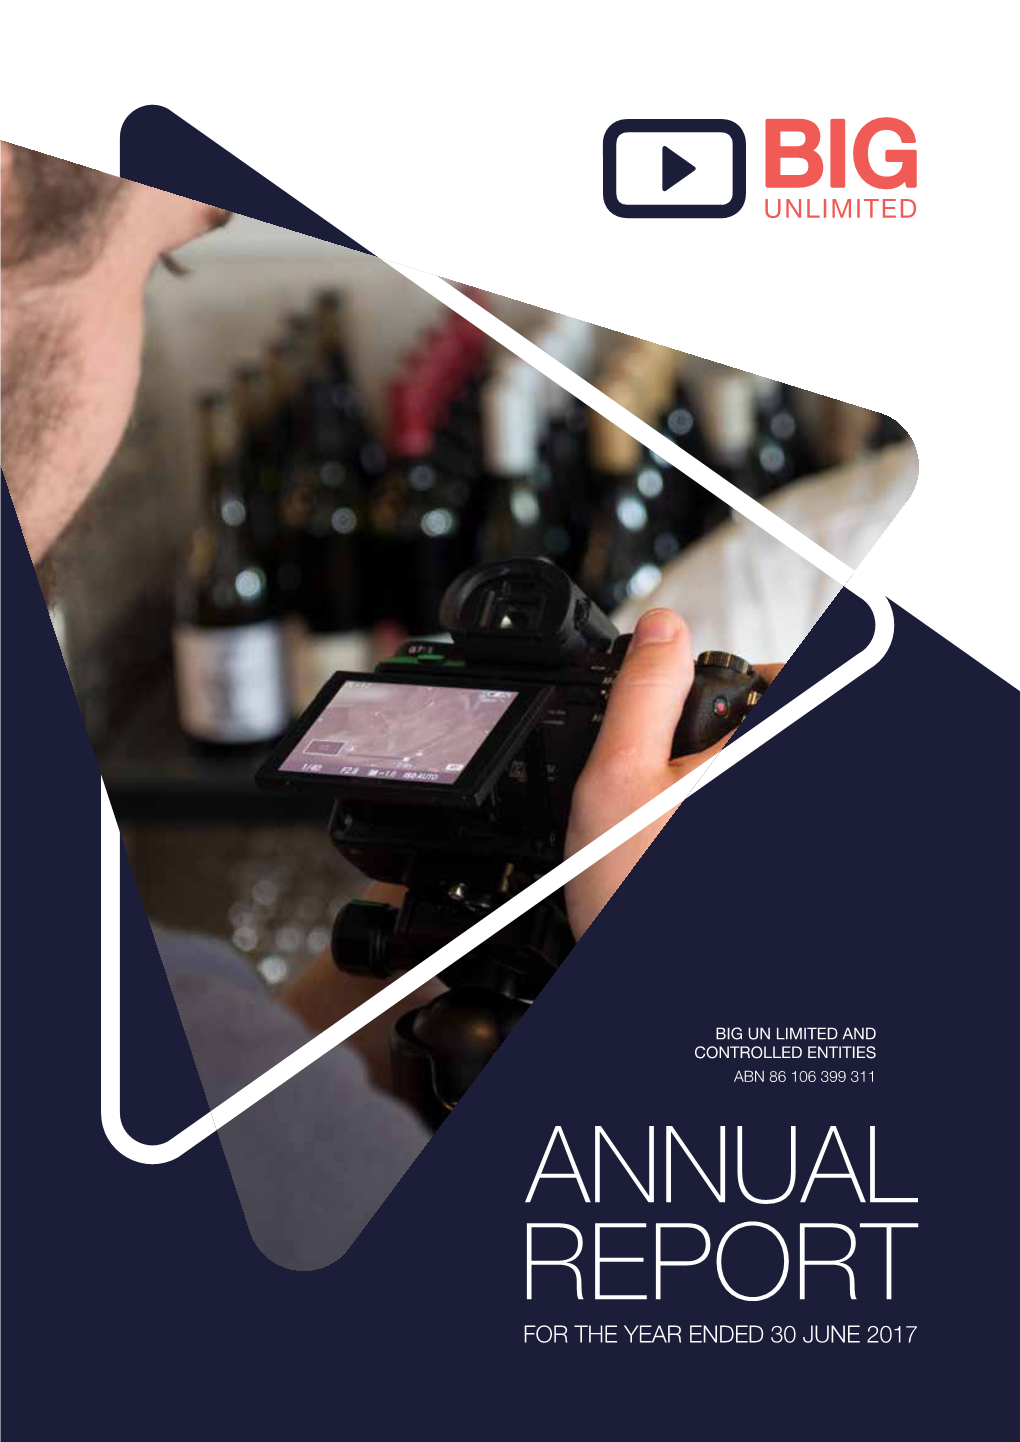 Annual Report for the Year Ended 30 June 2017